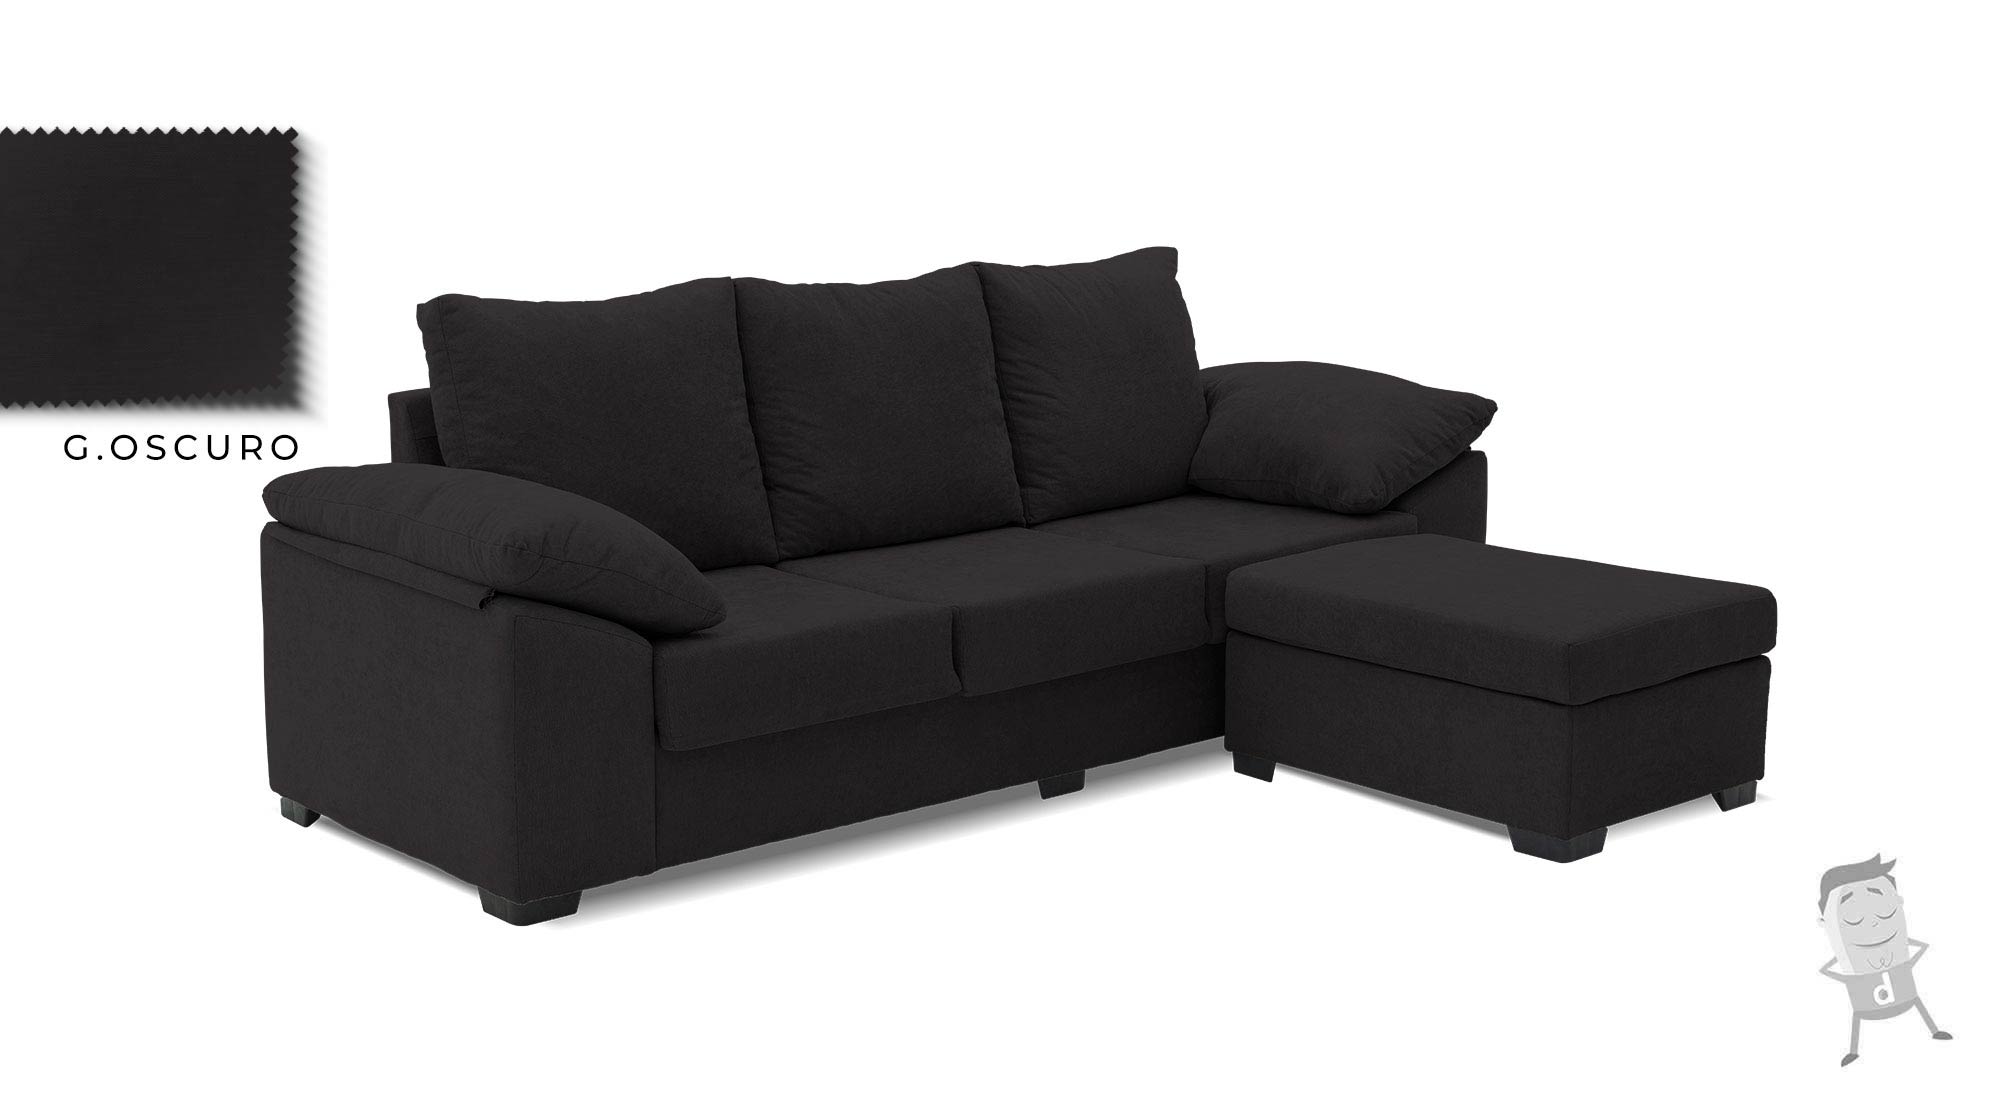 sofa-chaise-longue-ceo-gris-oscuro-lateral